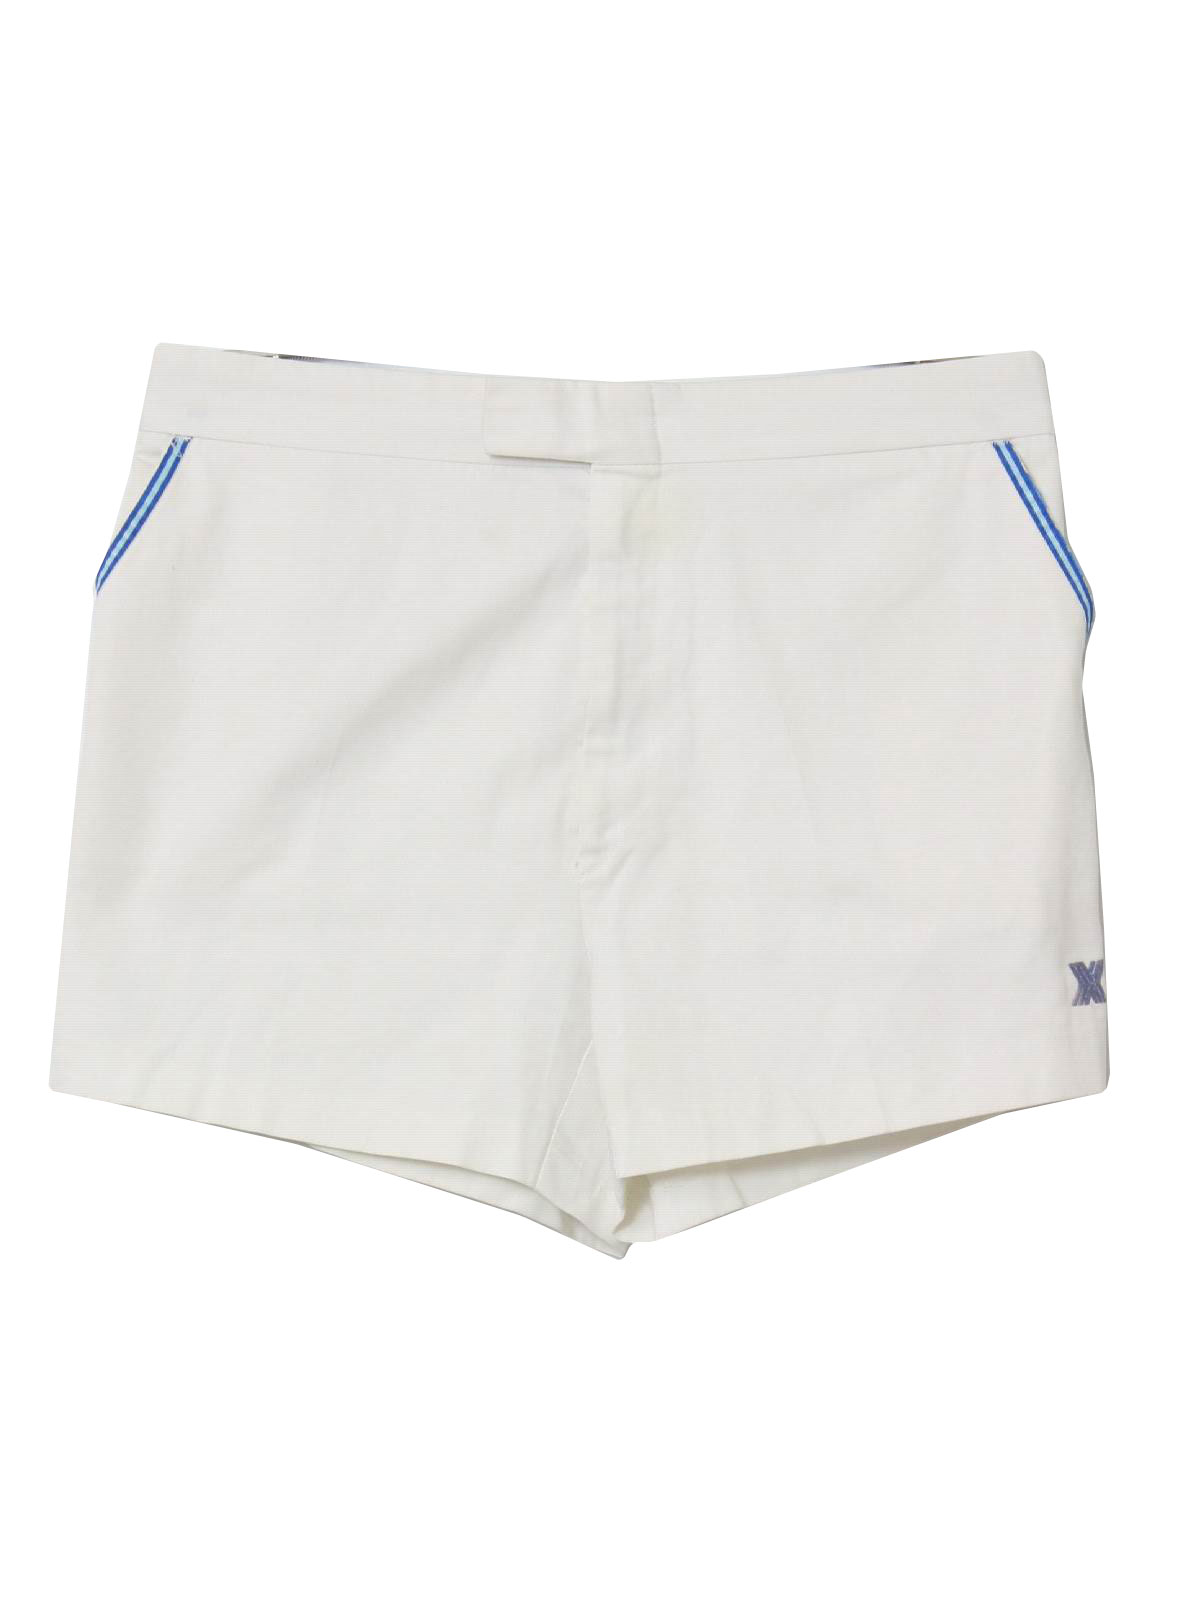 Retro Eighties Shorts: 80s -Jimmy Connors- Mens white background ...